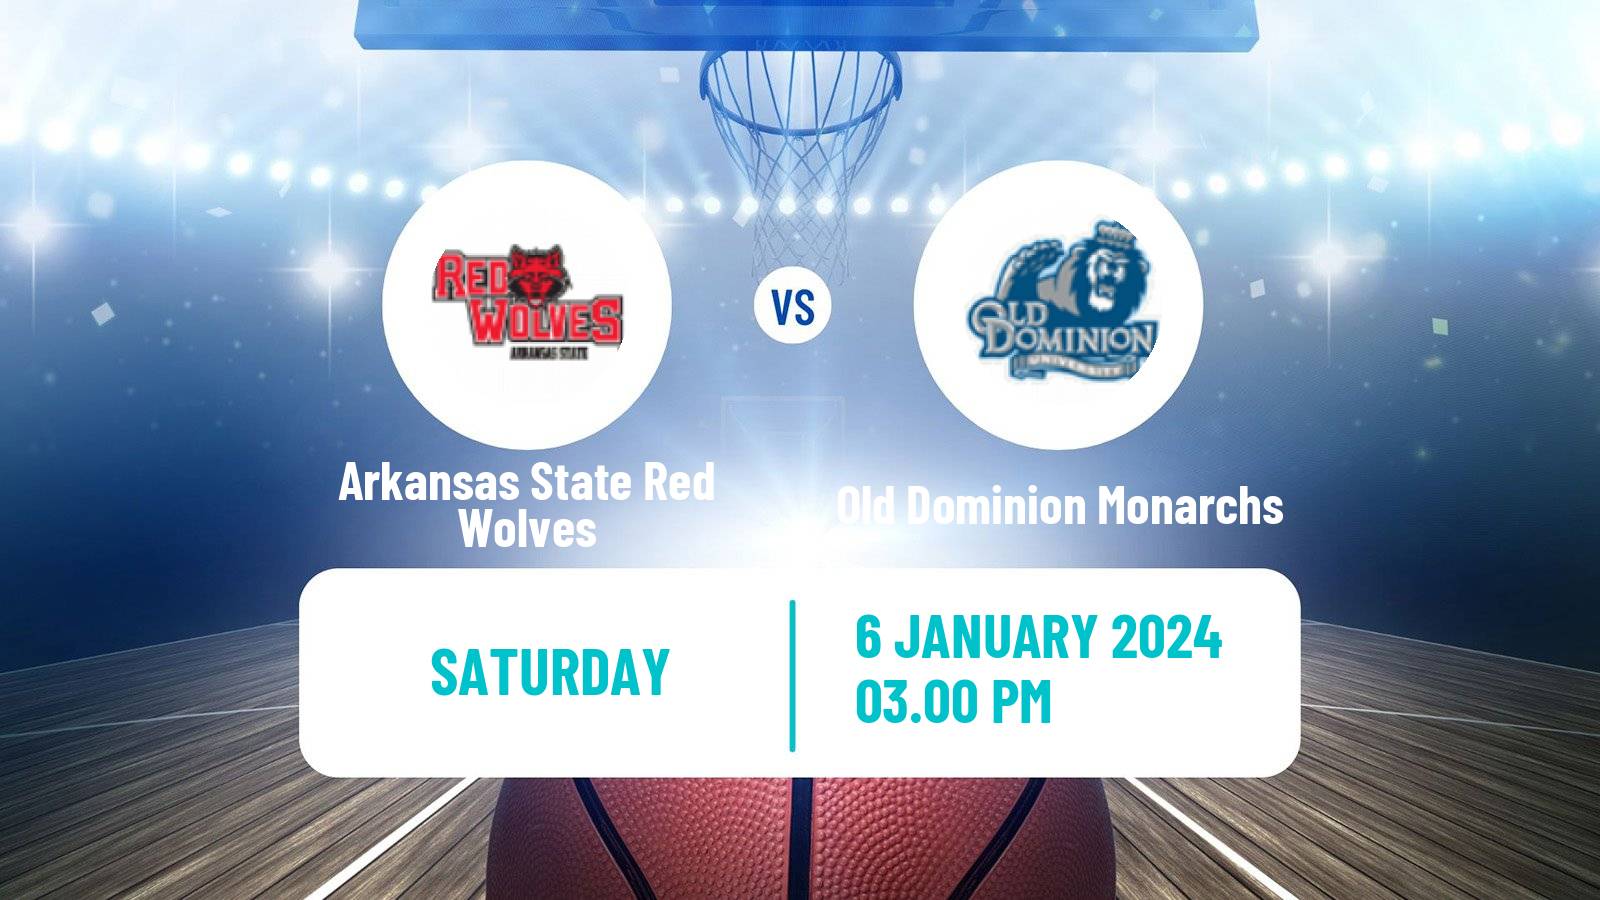 Basketball NCAA College Basketball Arkansas State Red Wolves - Old Dominion Monarchs